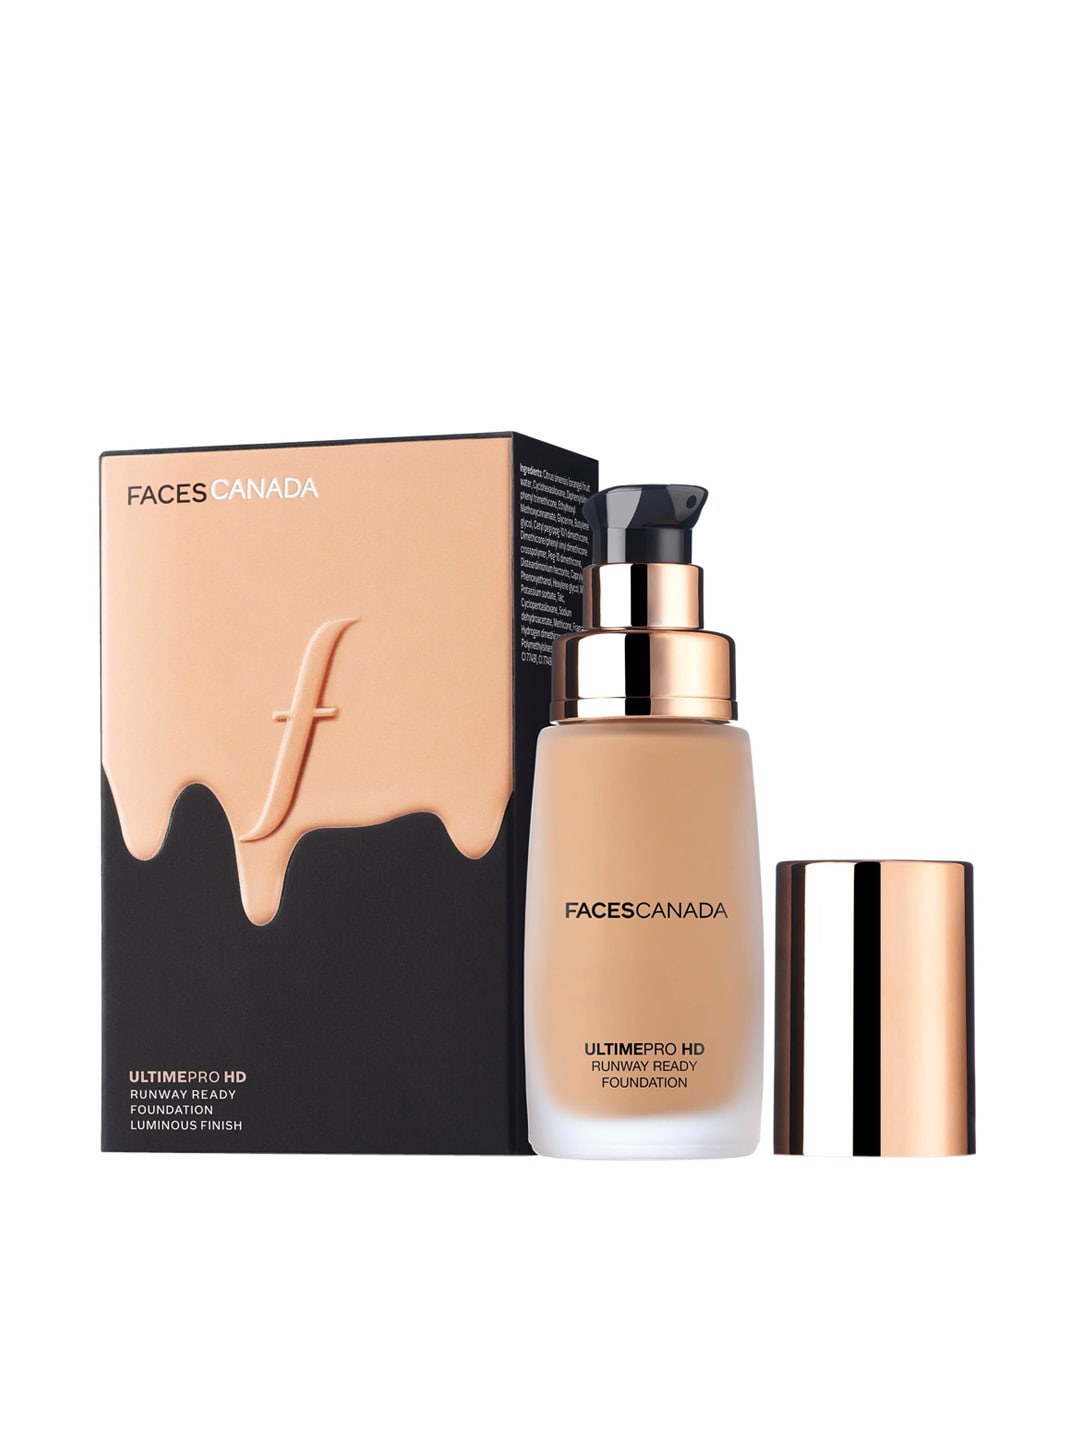 FACES CANADA Ultime Pro Hd Runway Ready Foundation Sand 04 30ml Price in India